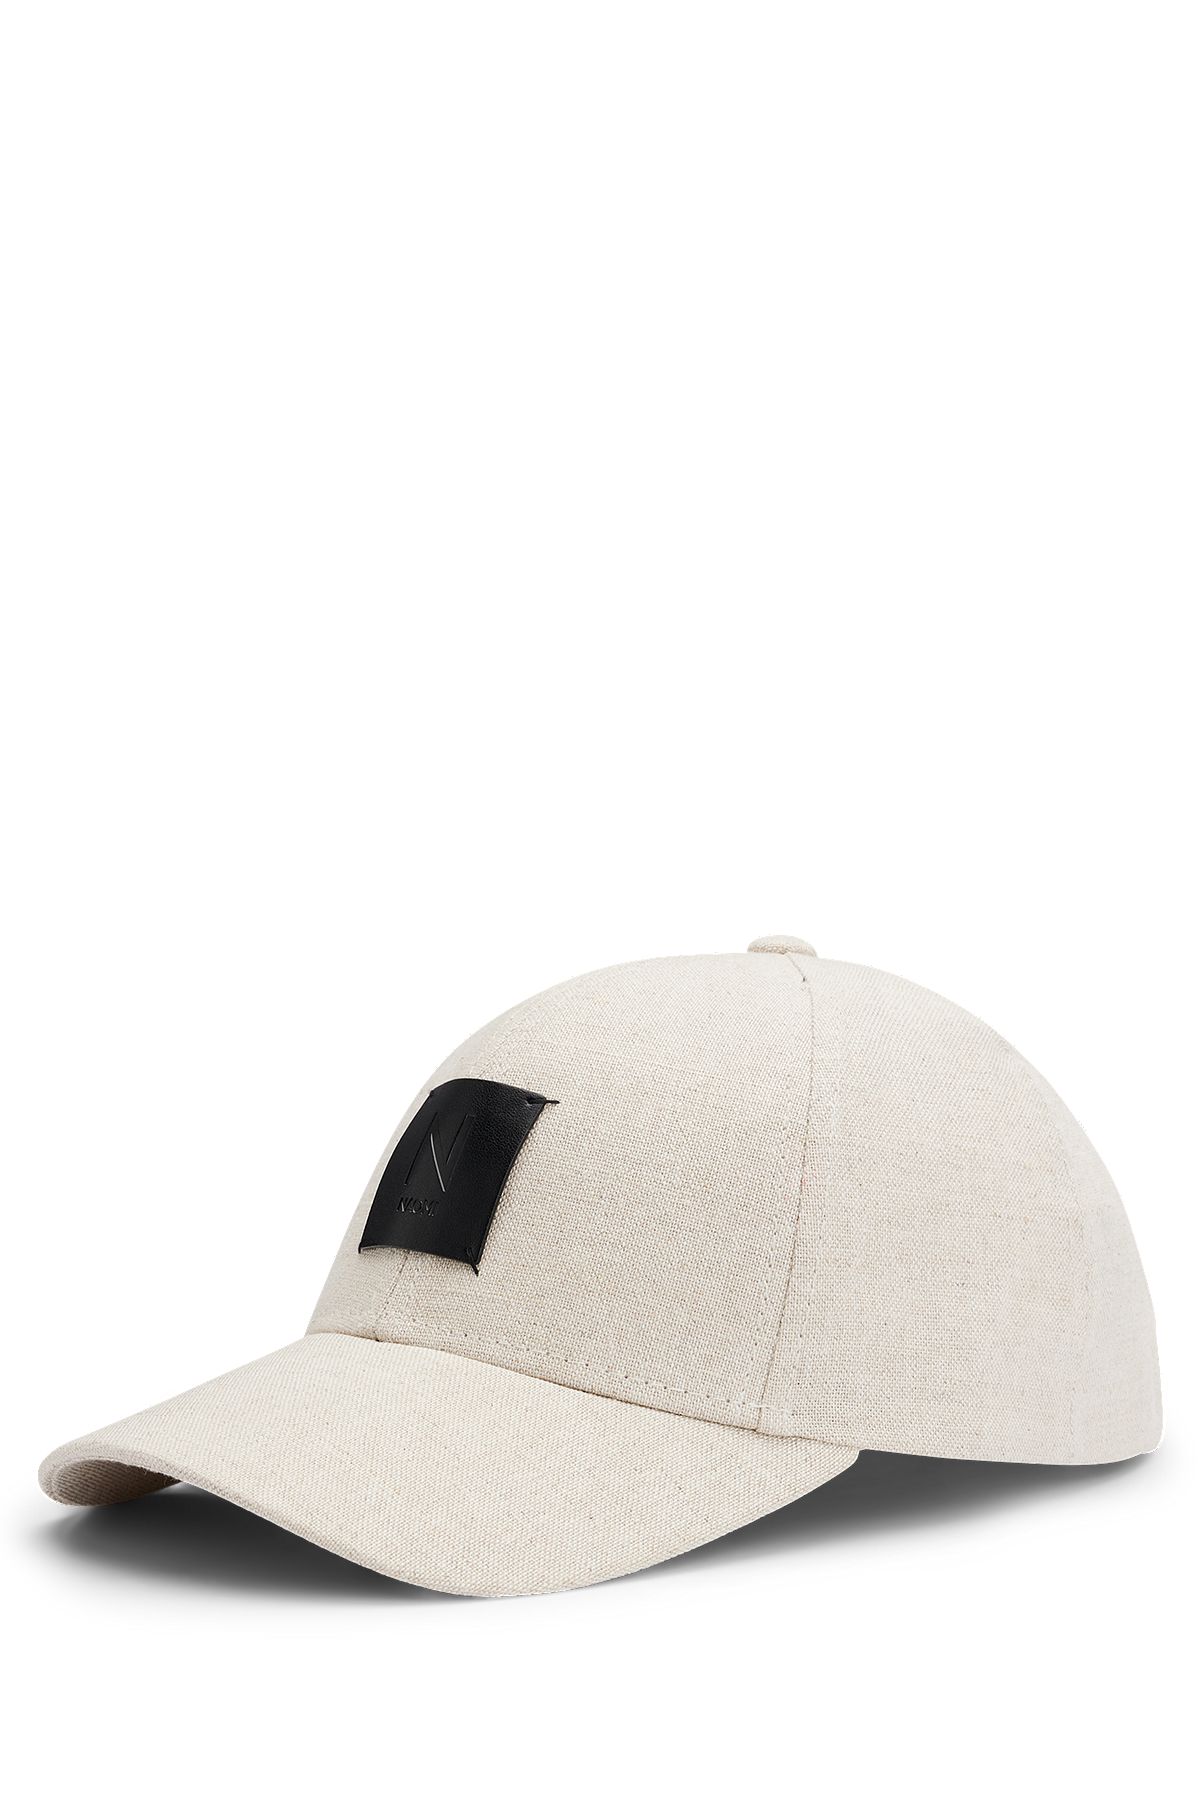 NAOMI x BOSS cap in cotton with logo patch, Natural